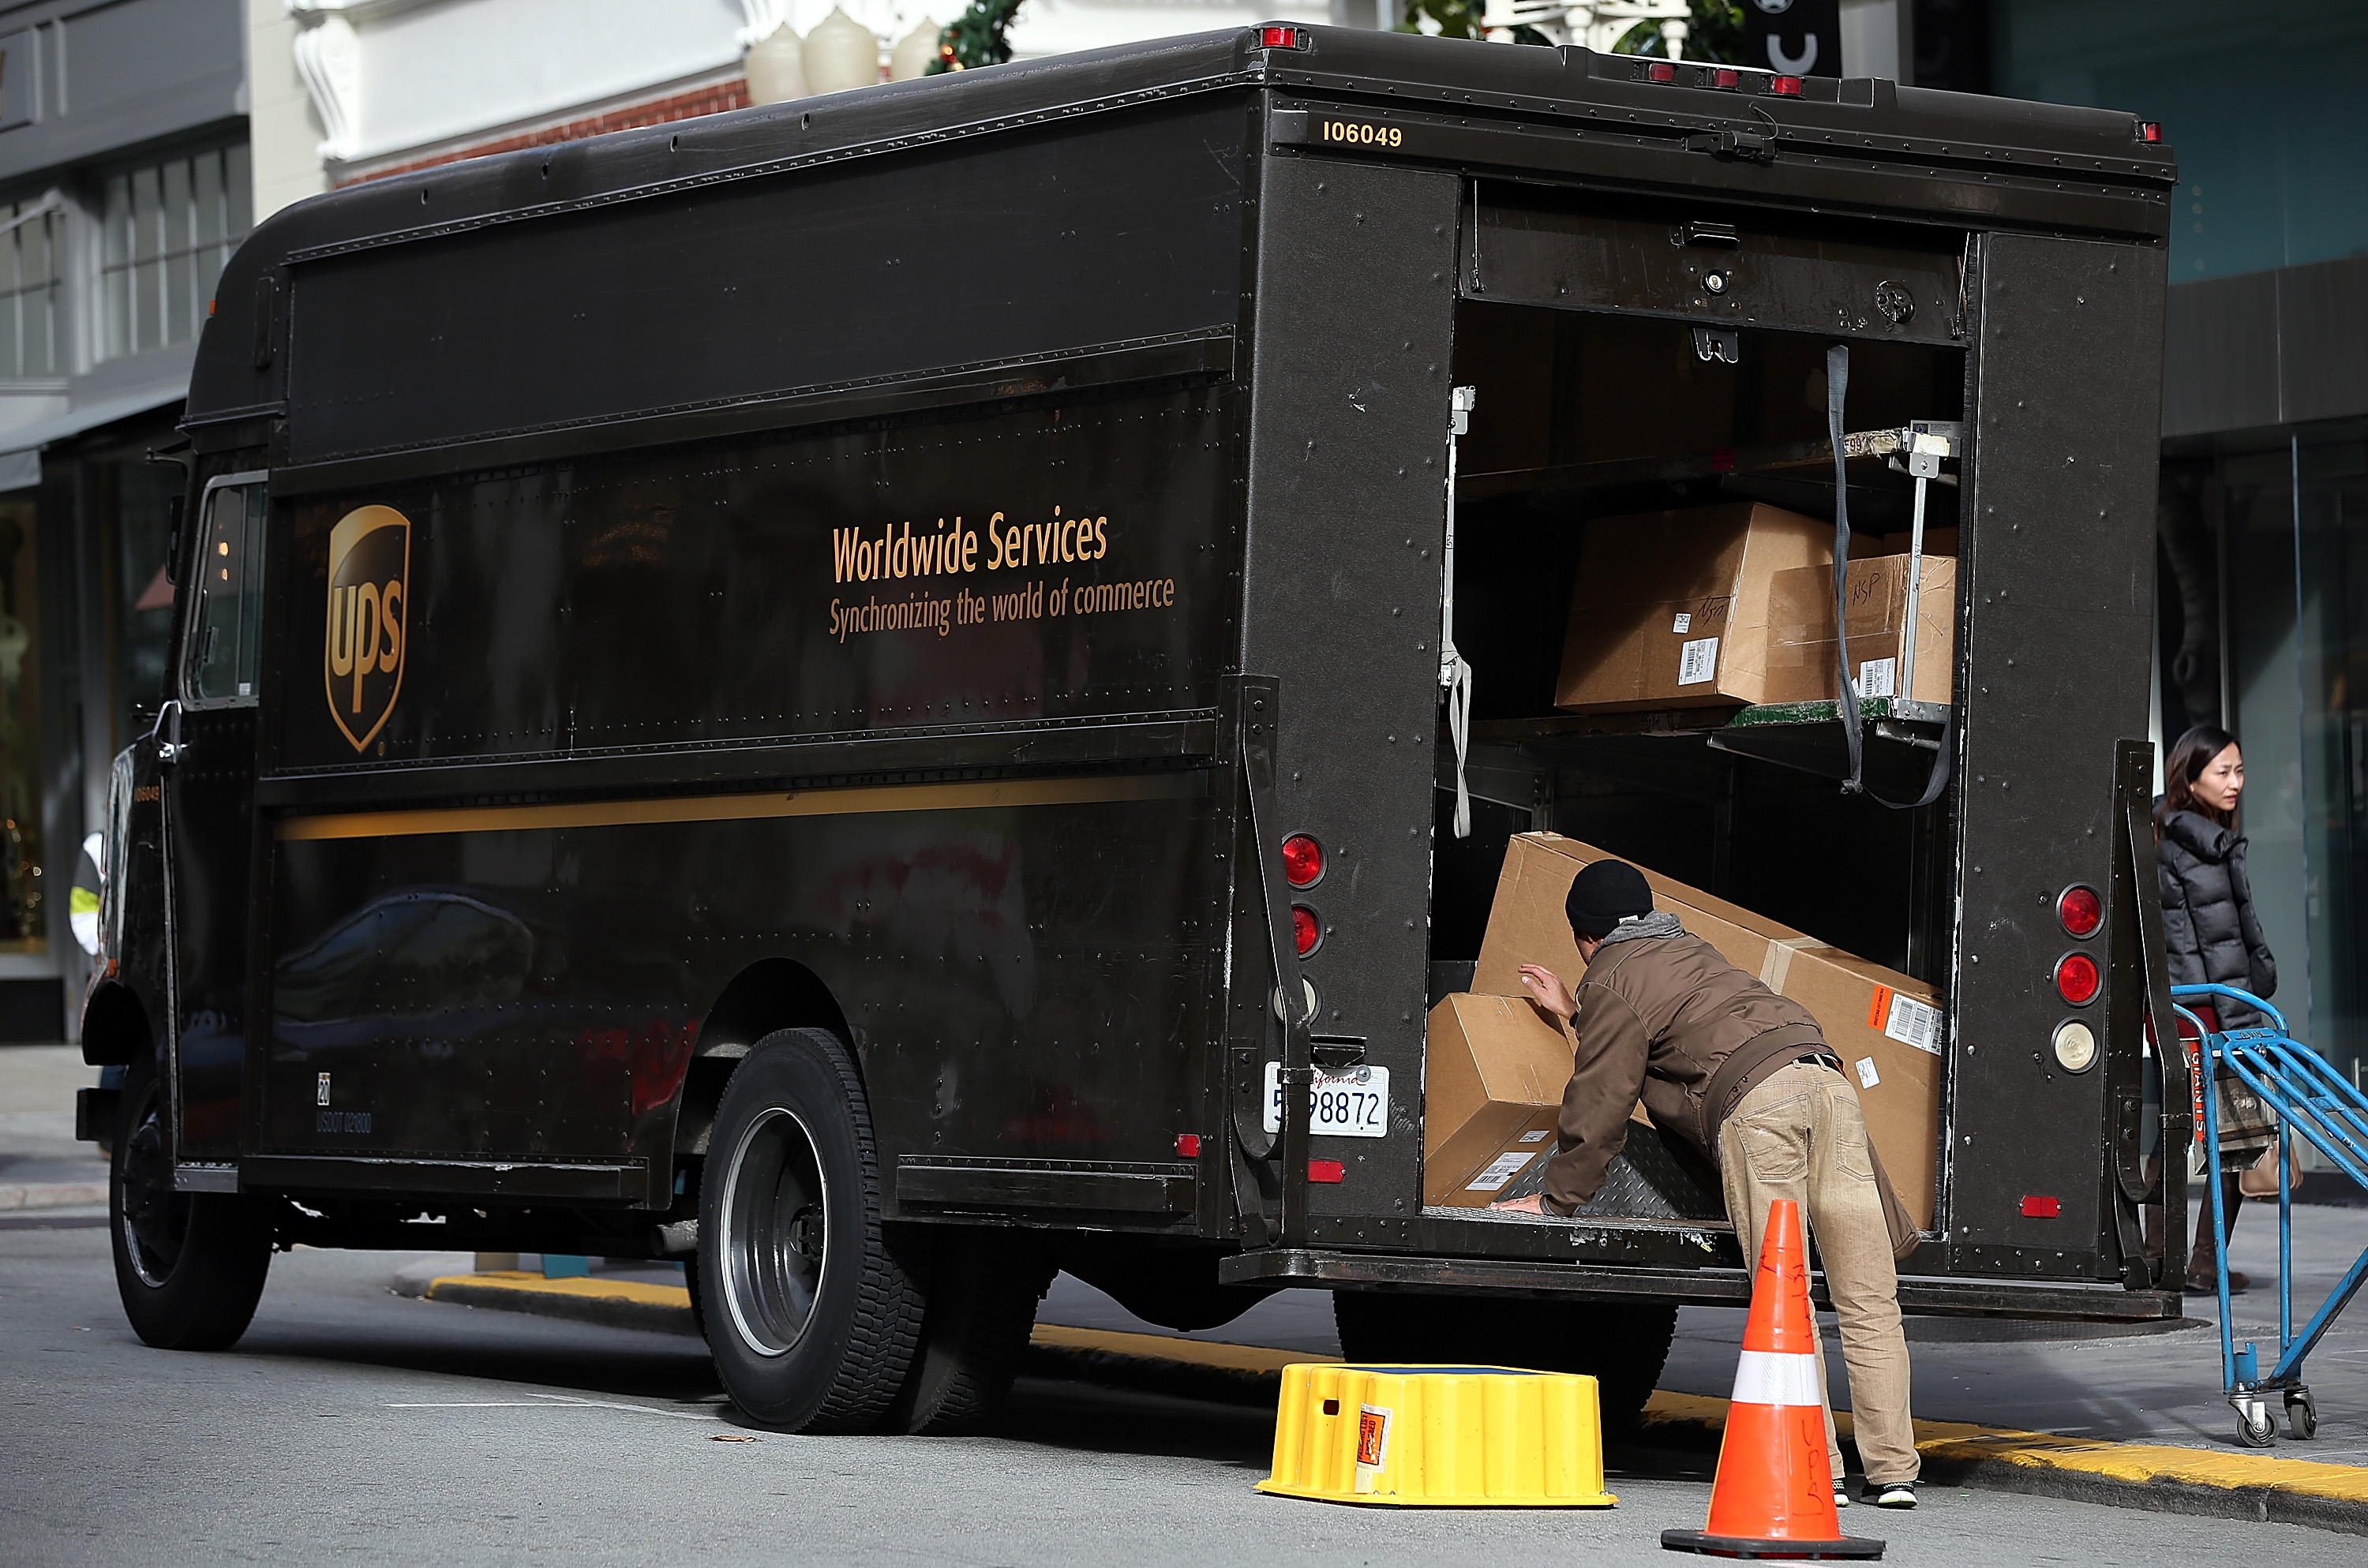 A UPS worker unloads packages from his truck on December 20, 2012 in San Francisco, California. (Justin Sullivan&mdash;Getty Images)